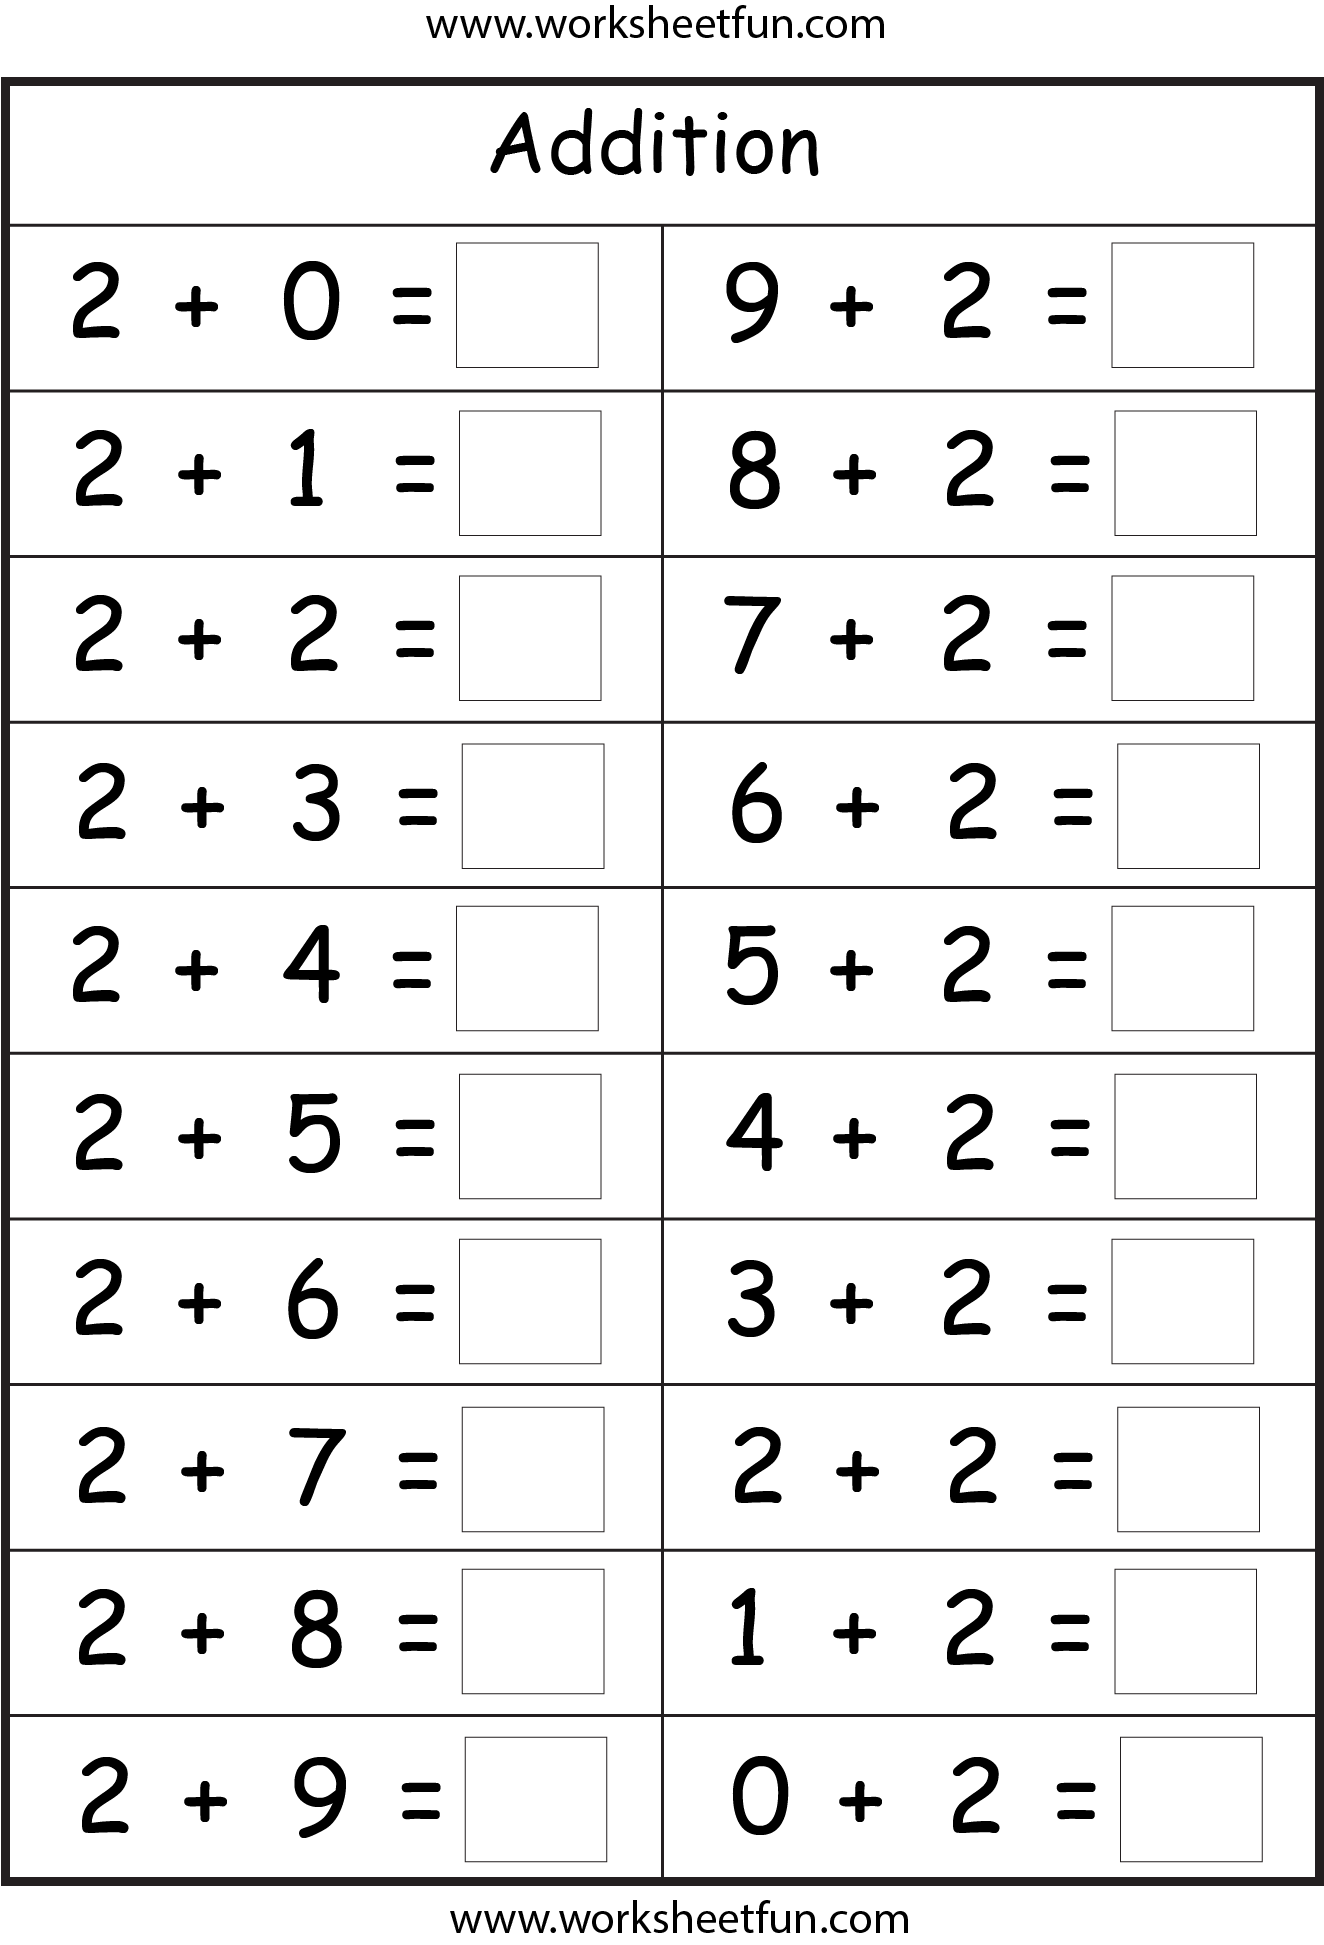 Basic Addition Facts 8 Worksheets / FREE Printable